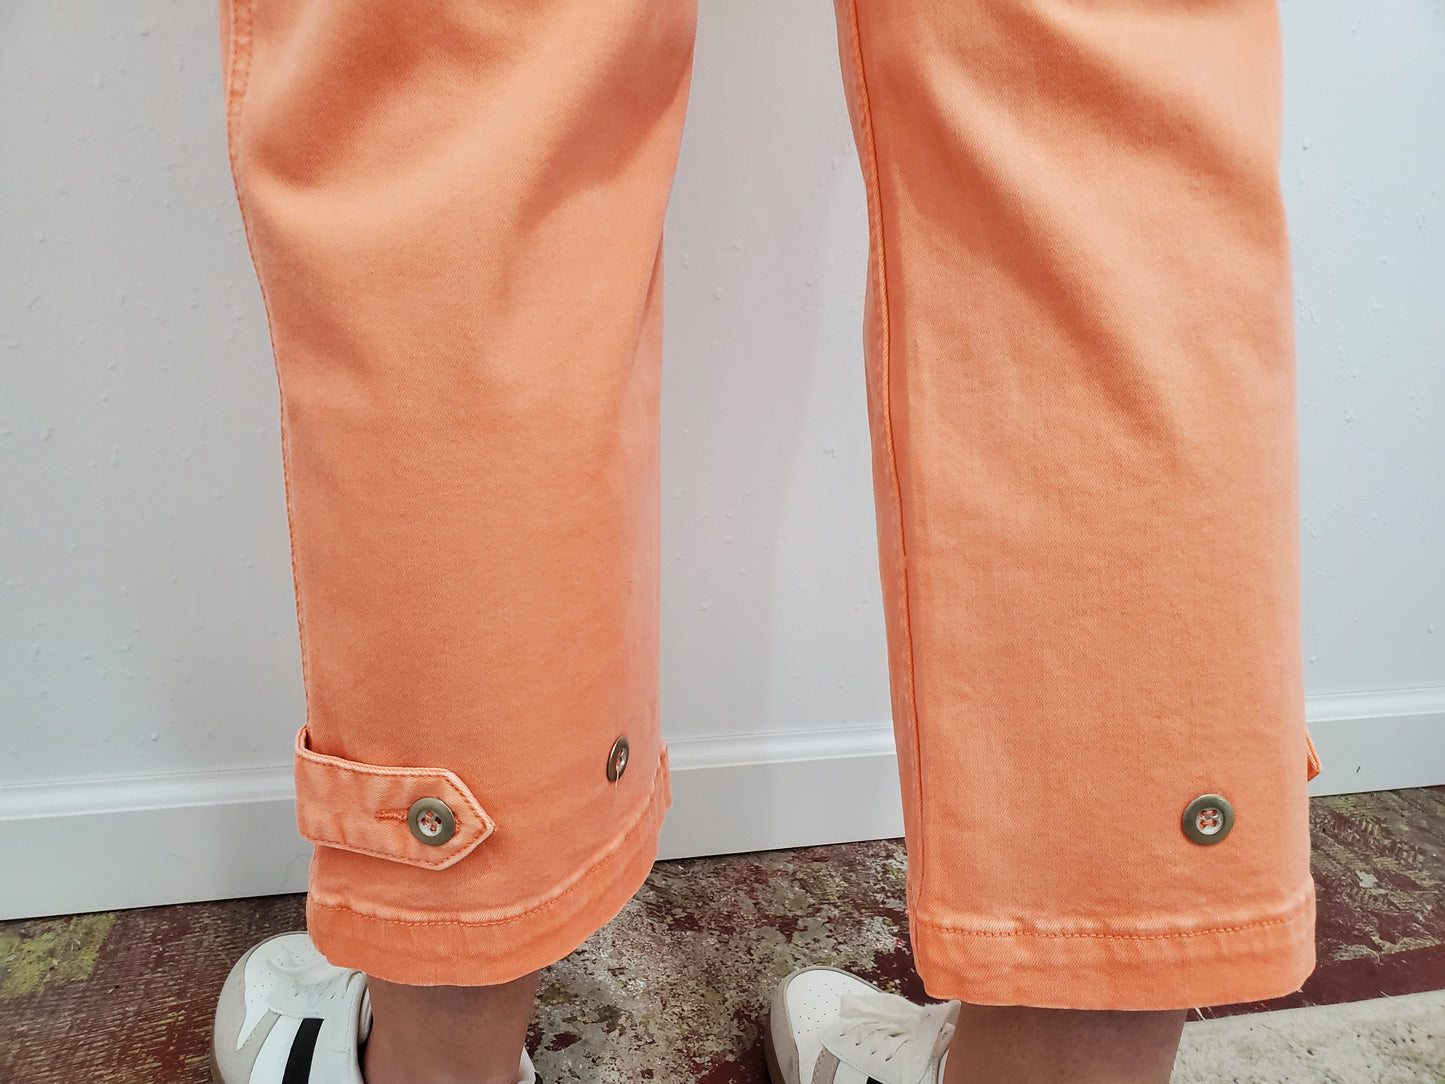 CHARLIE B CROPPED PULL ON TWILL PANTS - TANGERINE